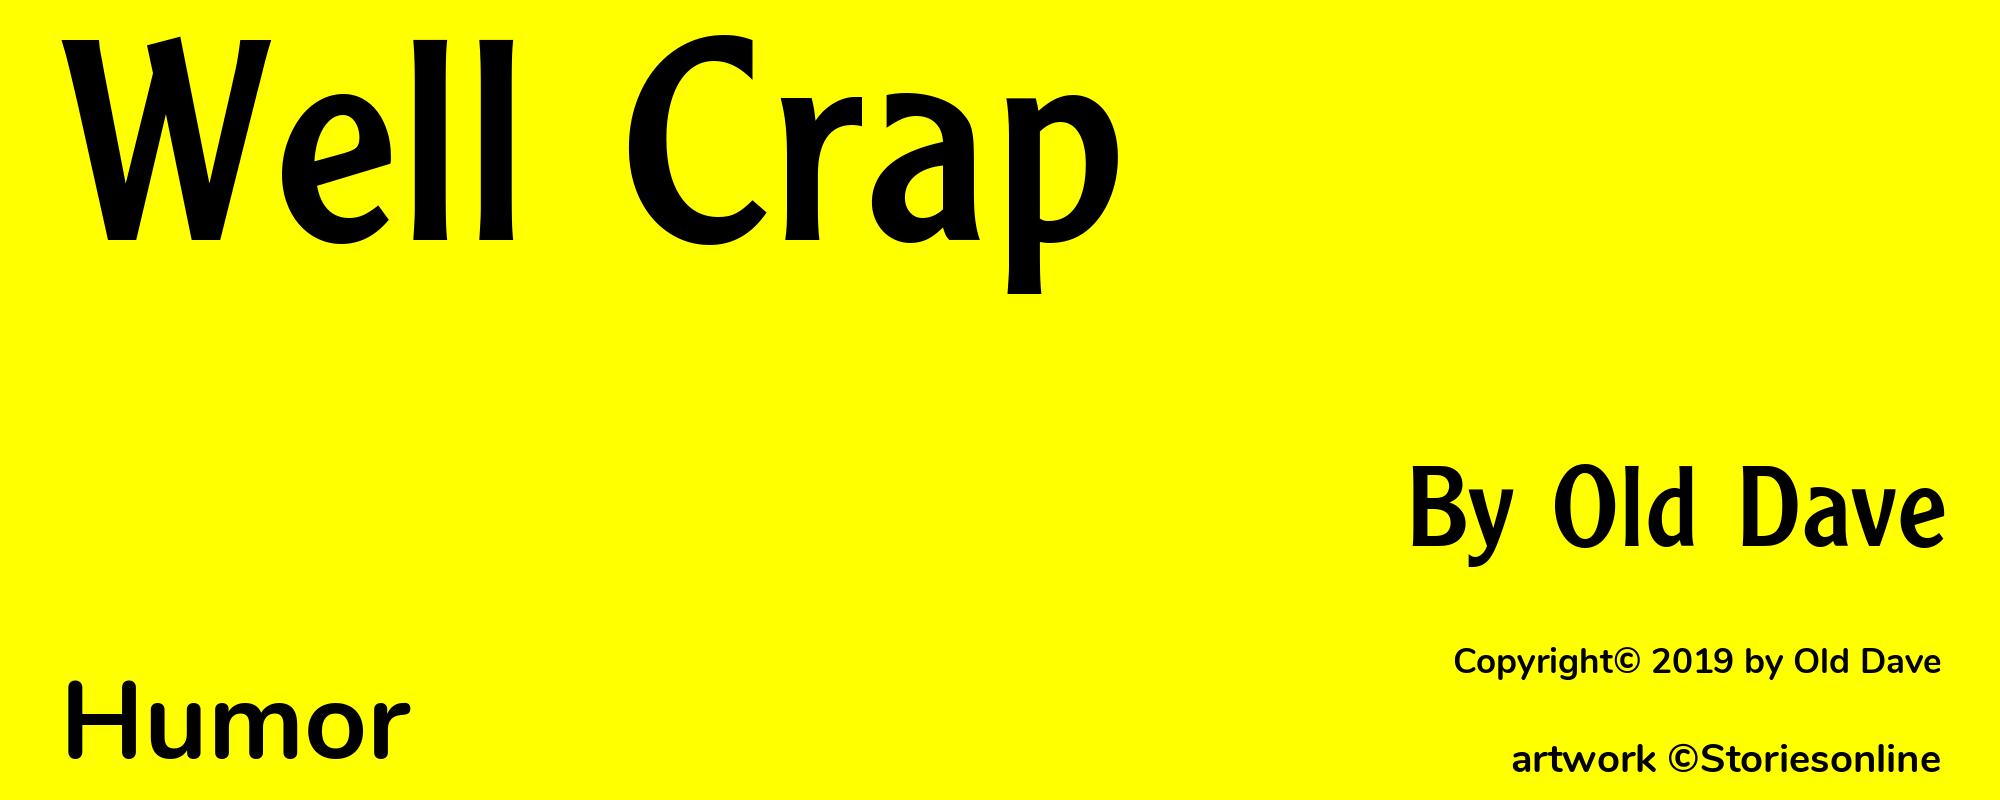 Well Crap - Cover